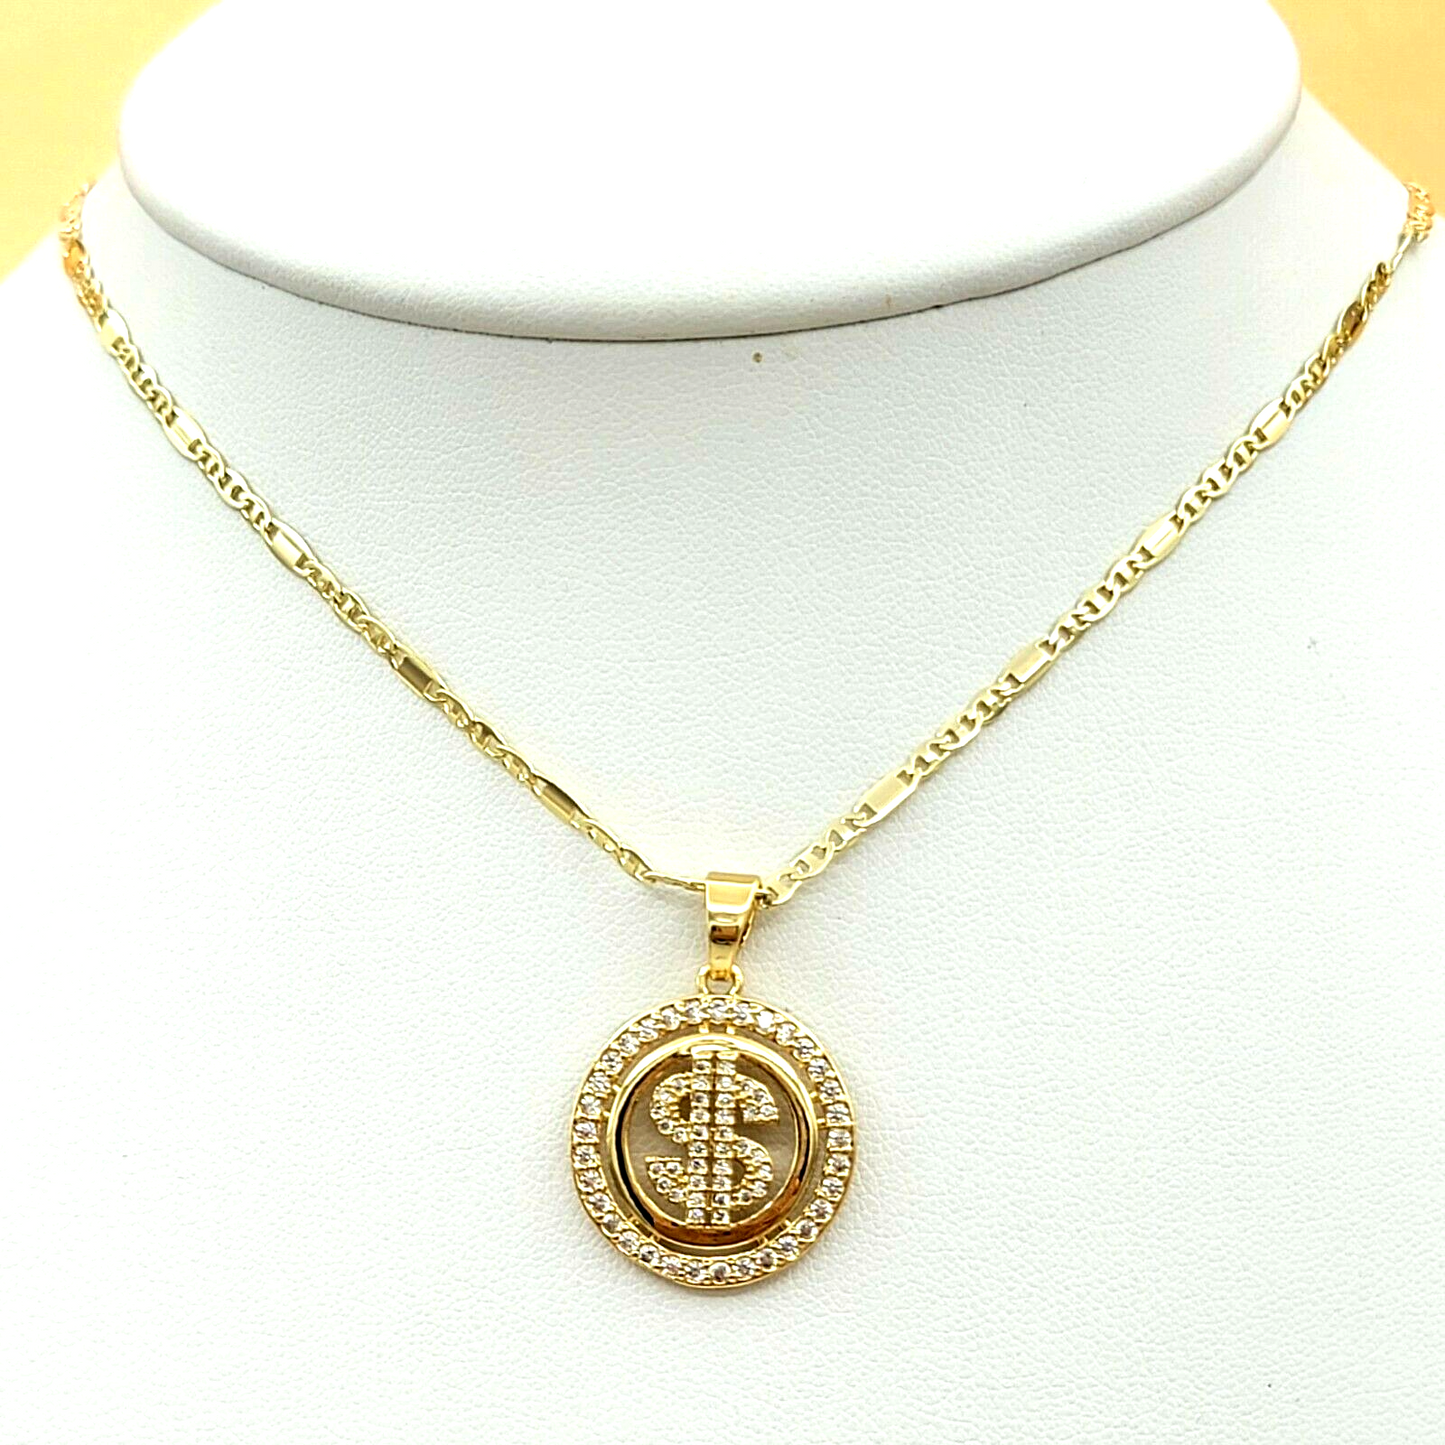 Necklaces - 14K Gold Plated. $ Dollar Sign Mark Money Symbol Pendant & Chain.